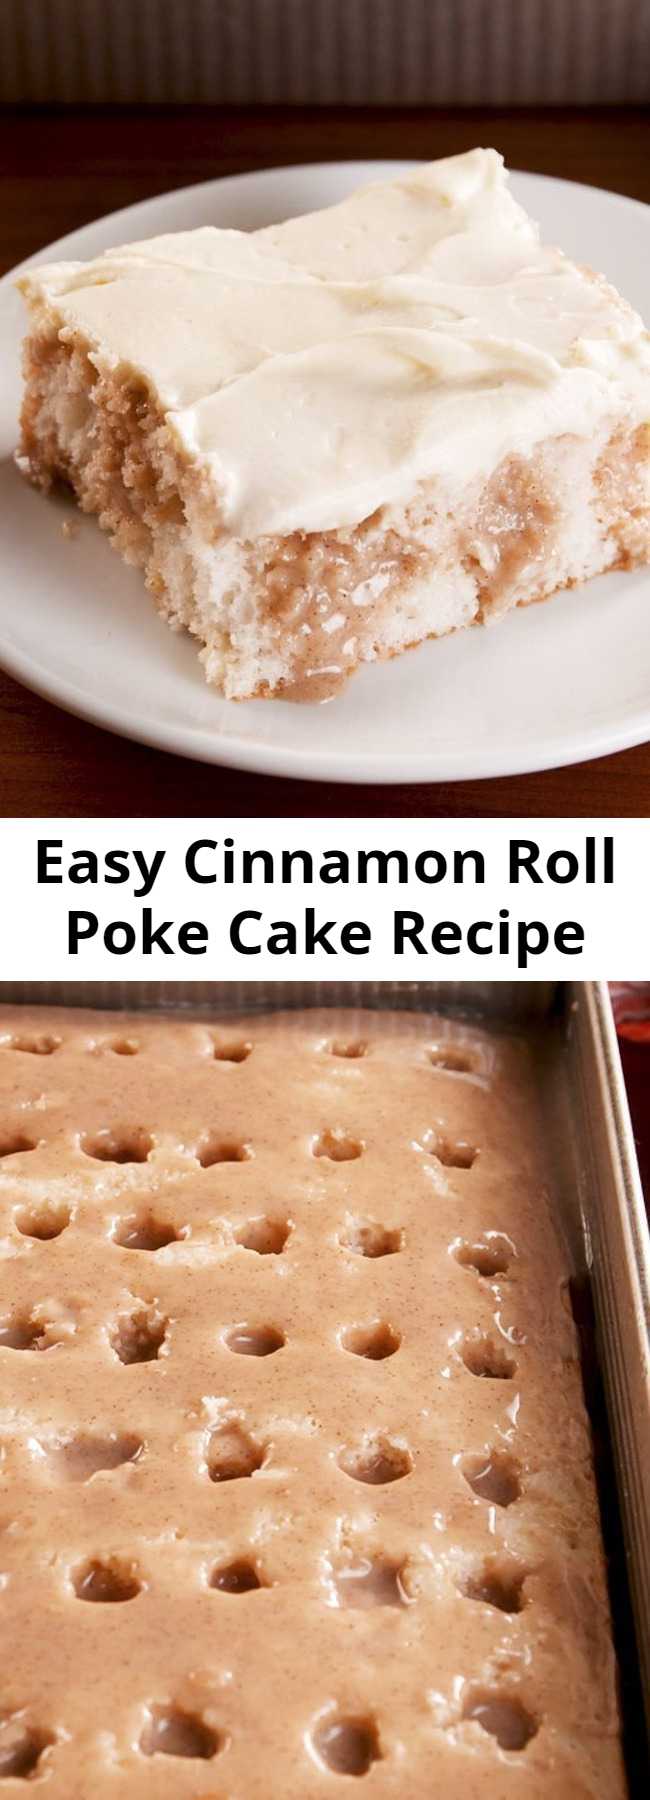 Cinnamon Roll Poke Cake Recipe - Get your cake pans ready for the most epic poke cake. It has everything you love about cinnamon rolls, even the cream cheese frosting! It's extremely decadent and exactly what we are craving at every moment of the day. #easy #recipe #cinnamonroll #pokecake #cinnamonrollpokecake #cakes #easydesserts